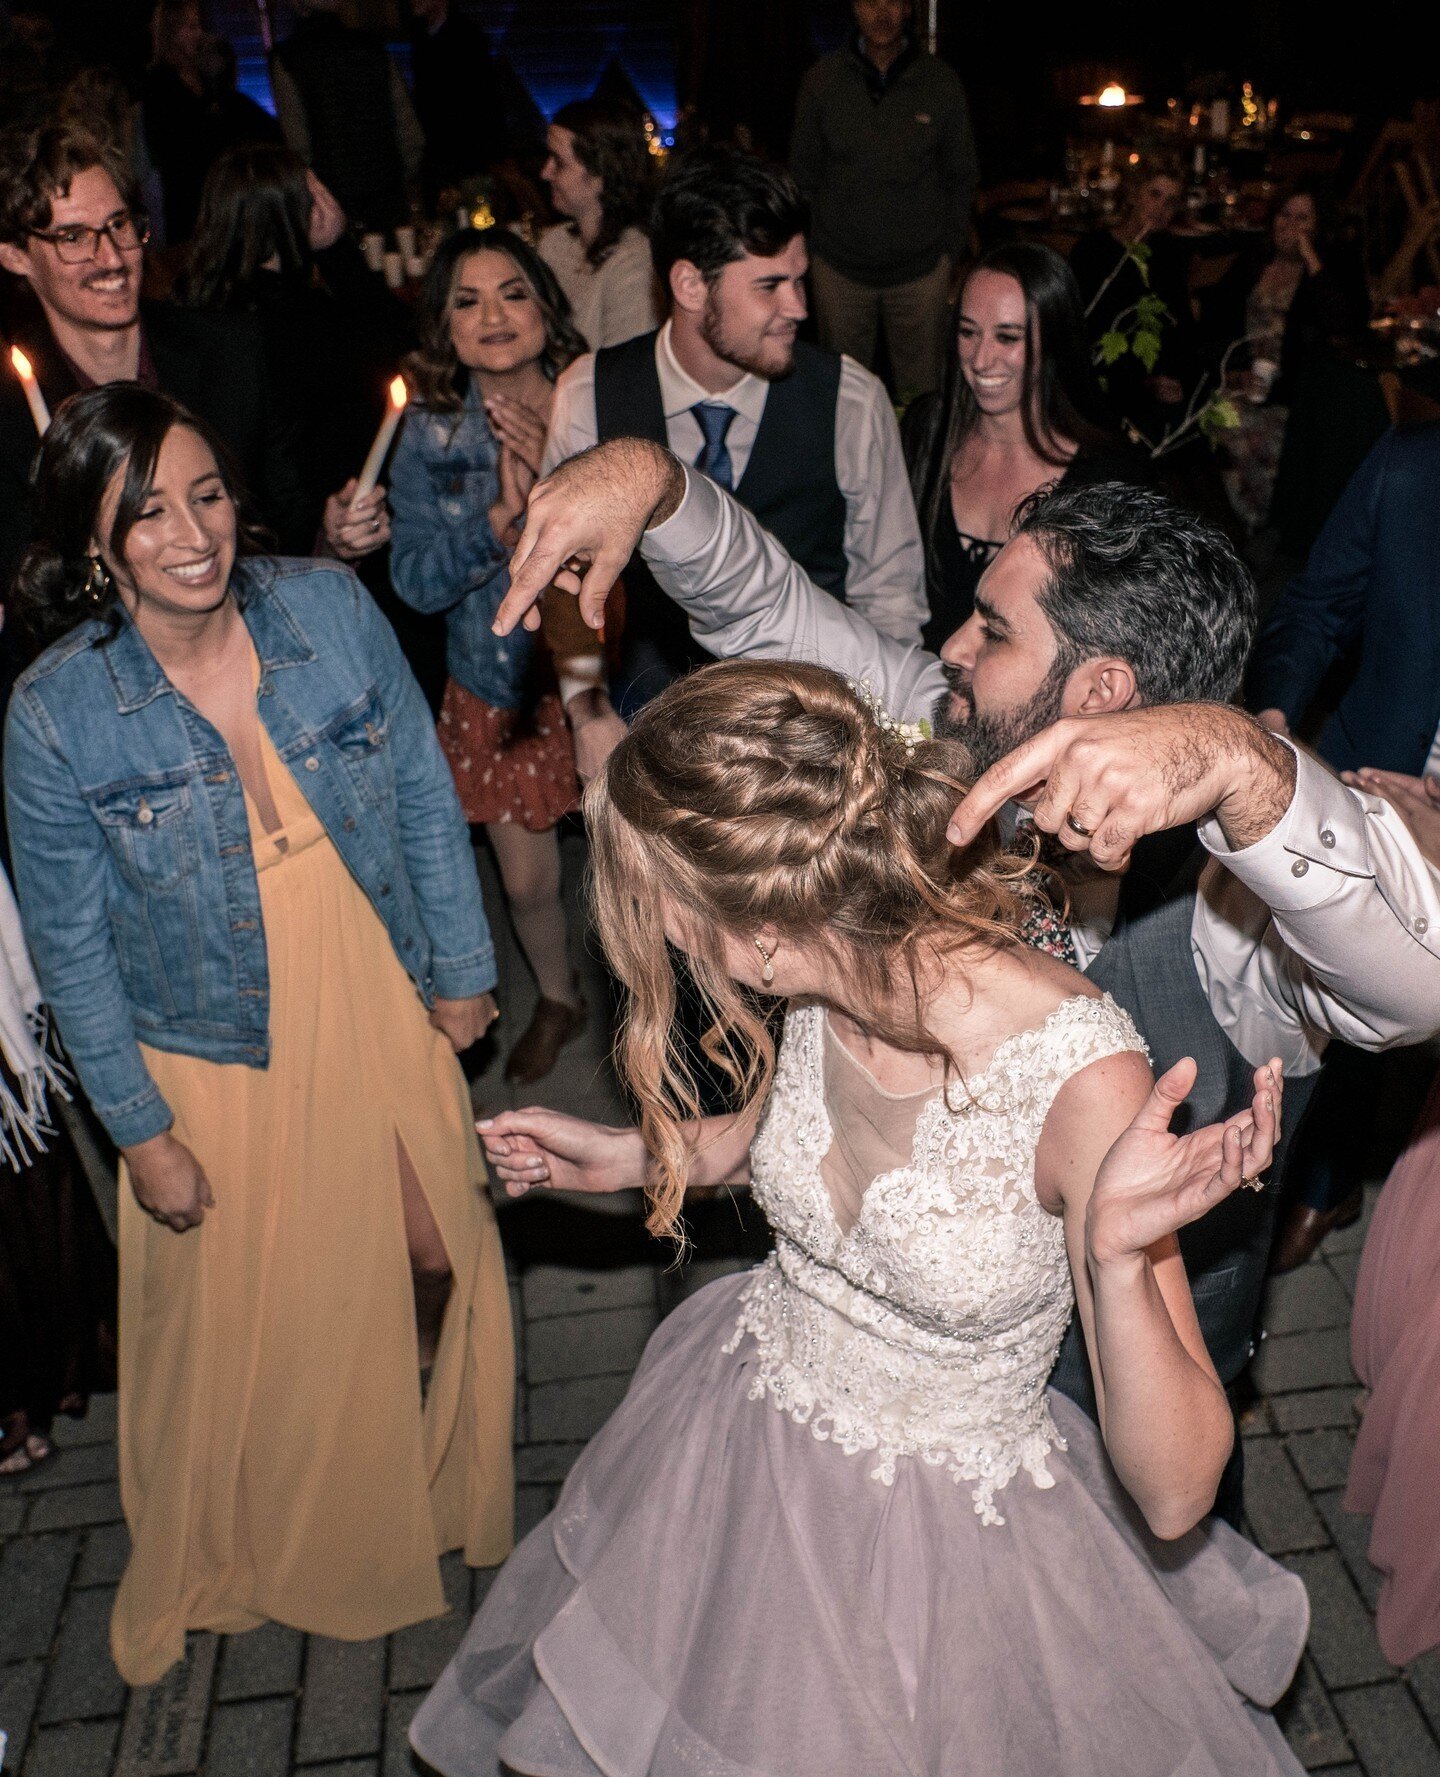 Here's your #MondayMotivation for your wedding dance floor! Bride's and grooms getting DOWN at their wedding is hands down one of the best parts of the job! ⁠
⁠
⁠
DJ: @djalexupdike⁠
Photo: @itm.production⁠
Venue: @thousandpines